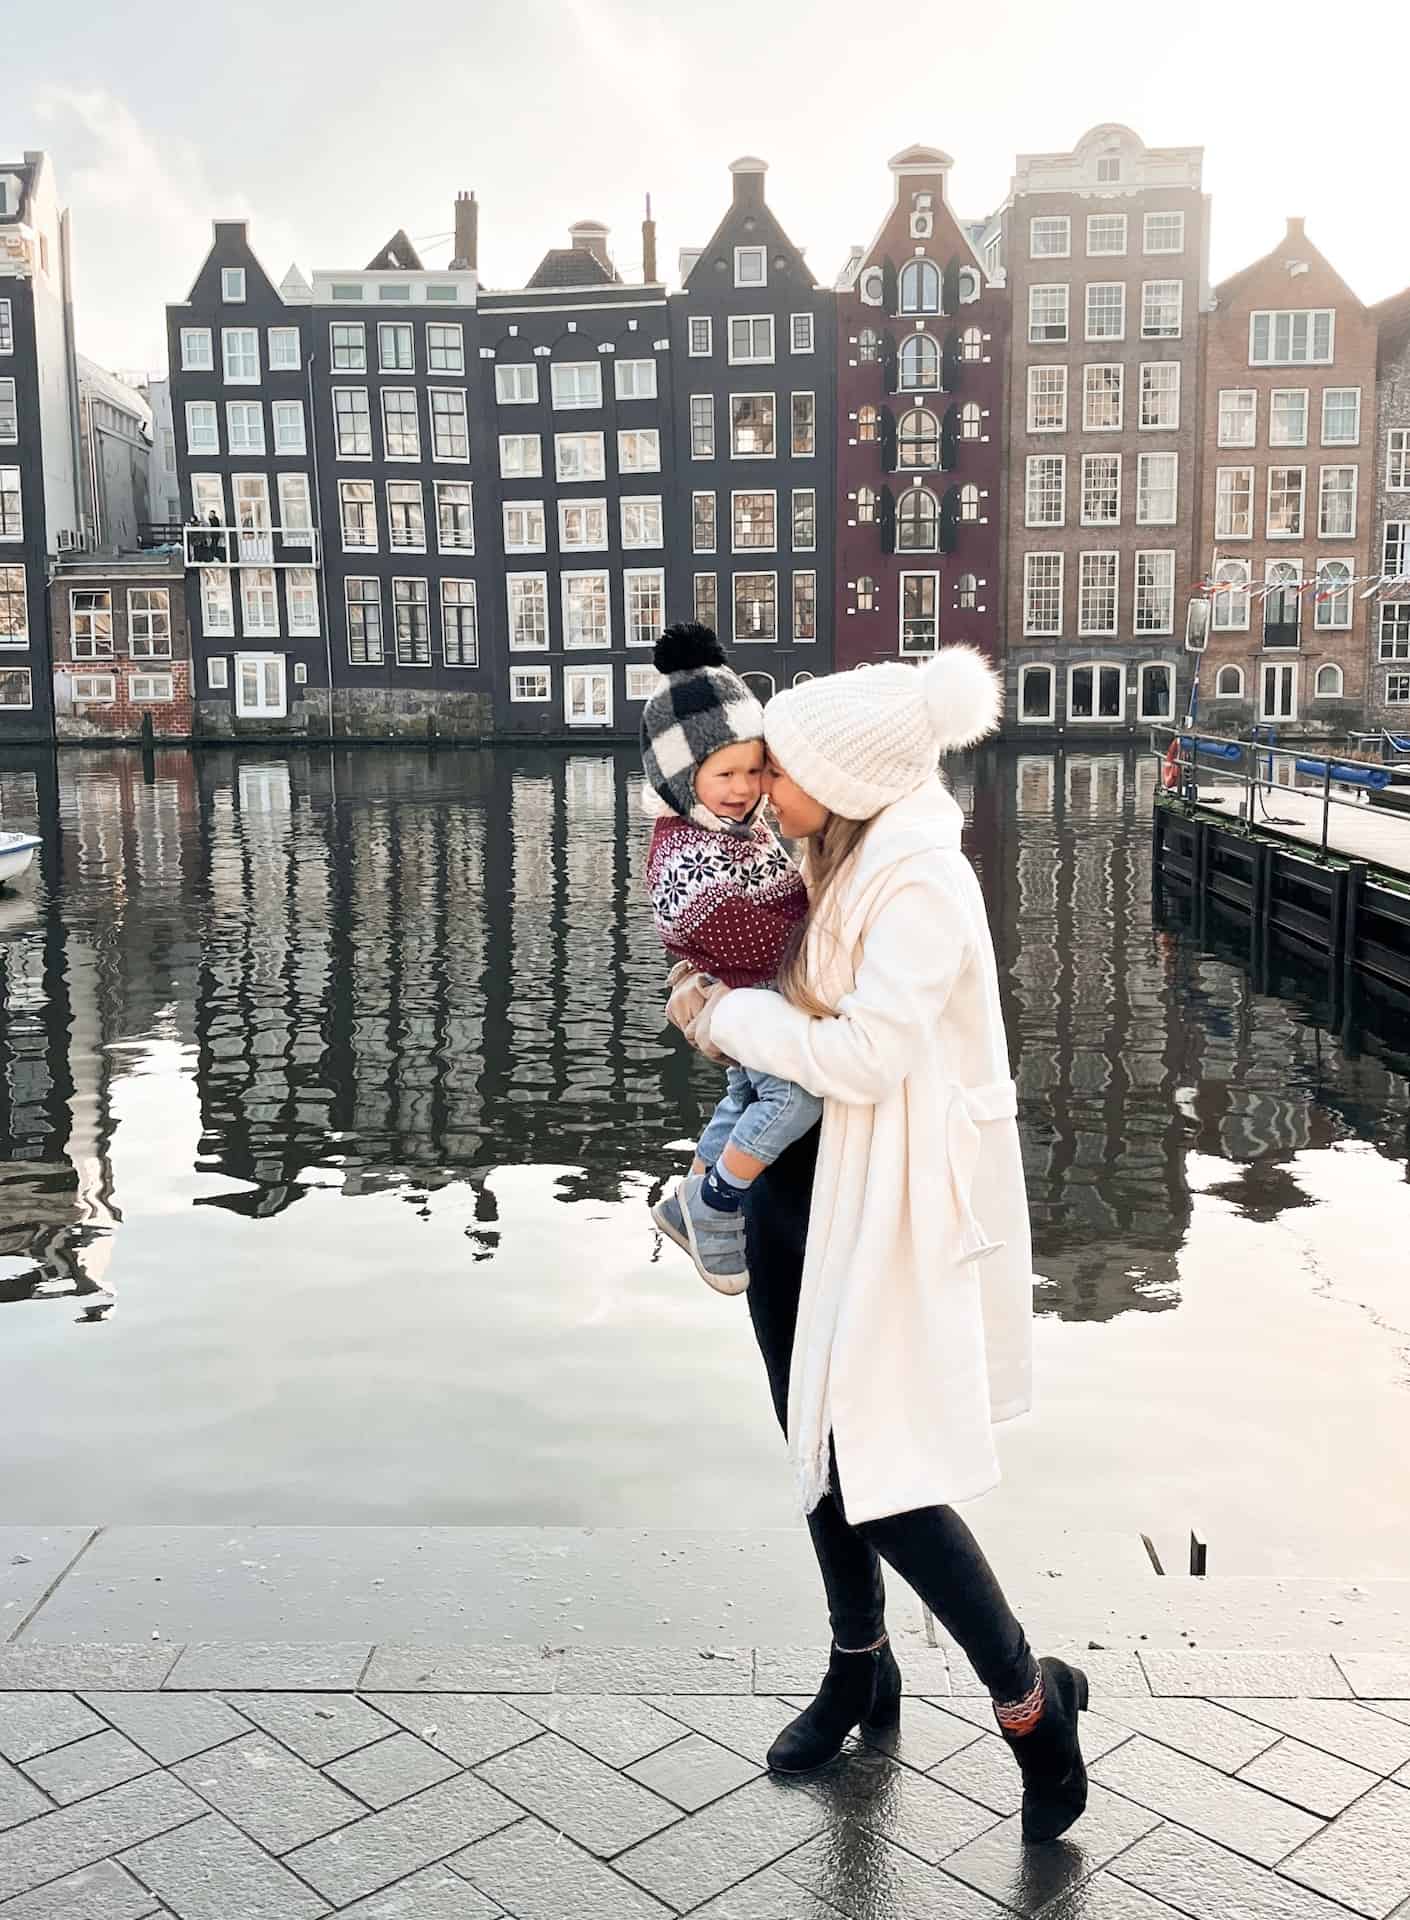 How to Spend a Long Layover in Amsterdam - The Layover Guide - Rachel's ...